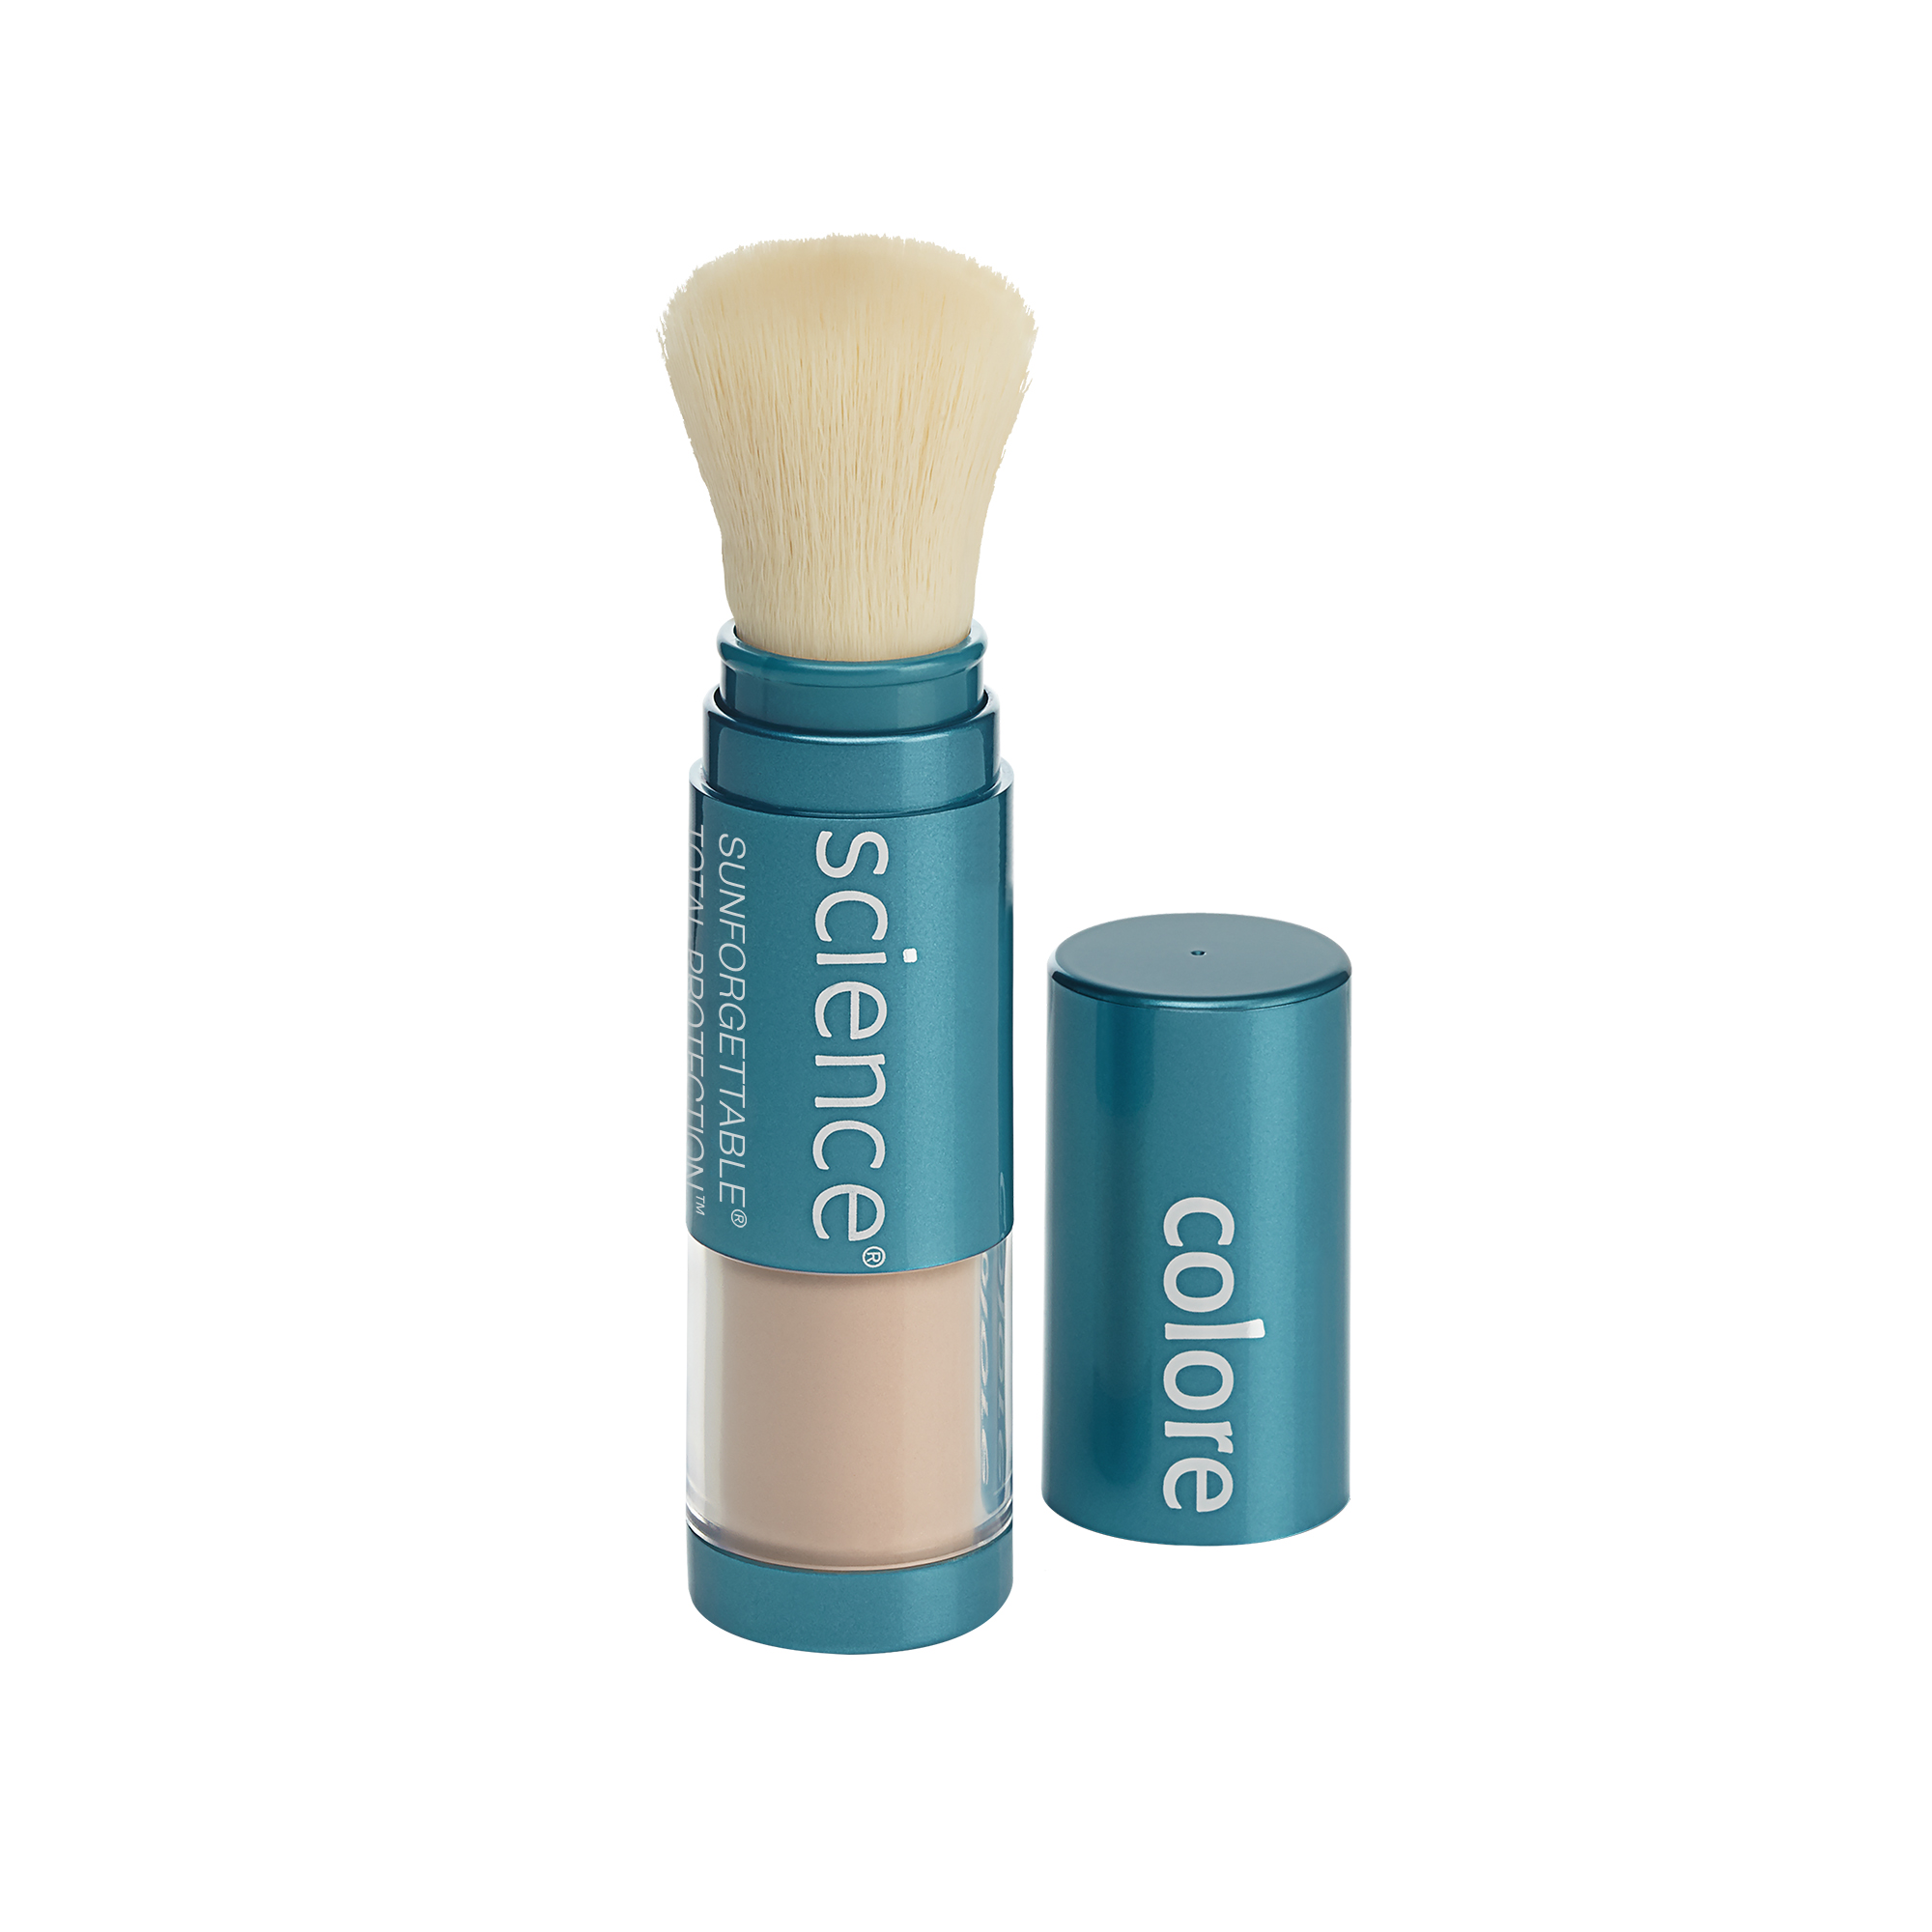 Colorescience Sunforgettable Total Protection Brush & Lid